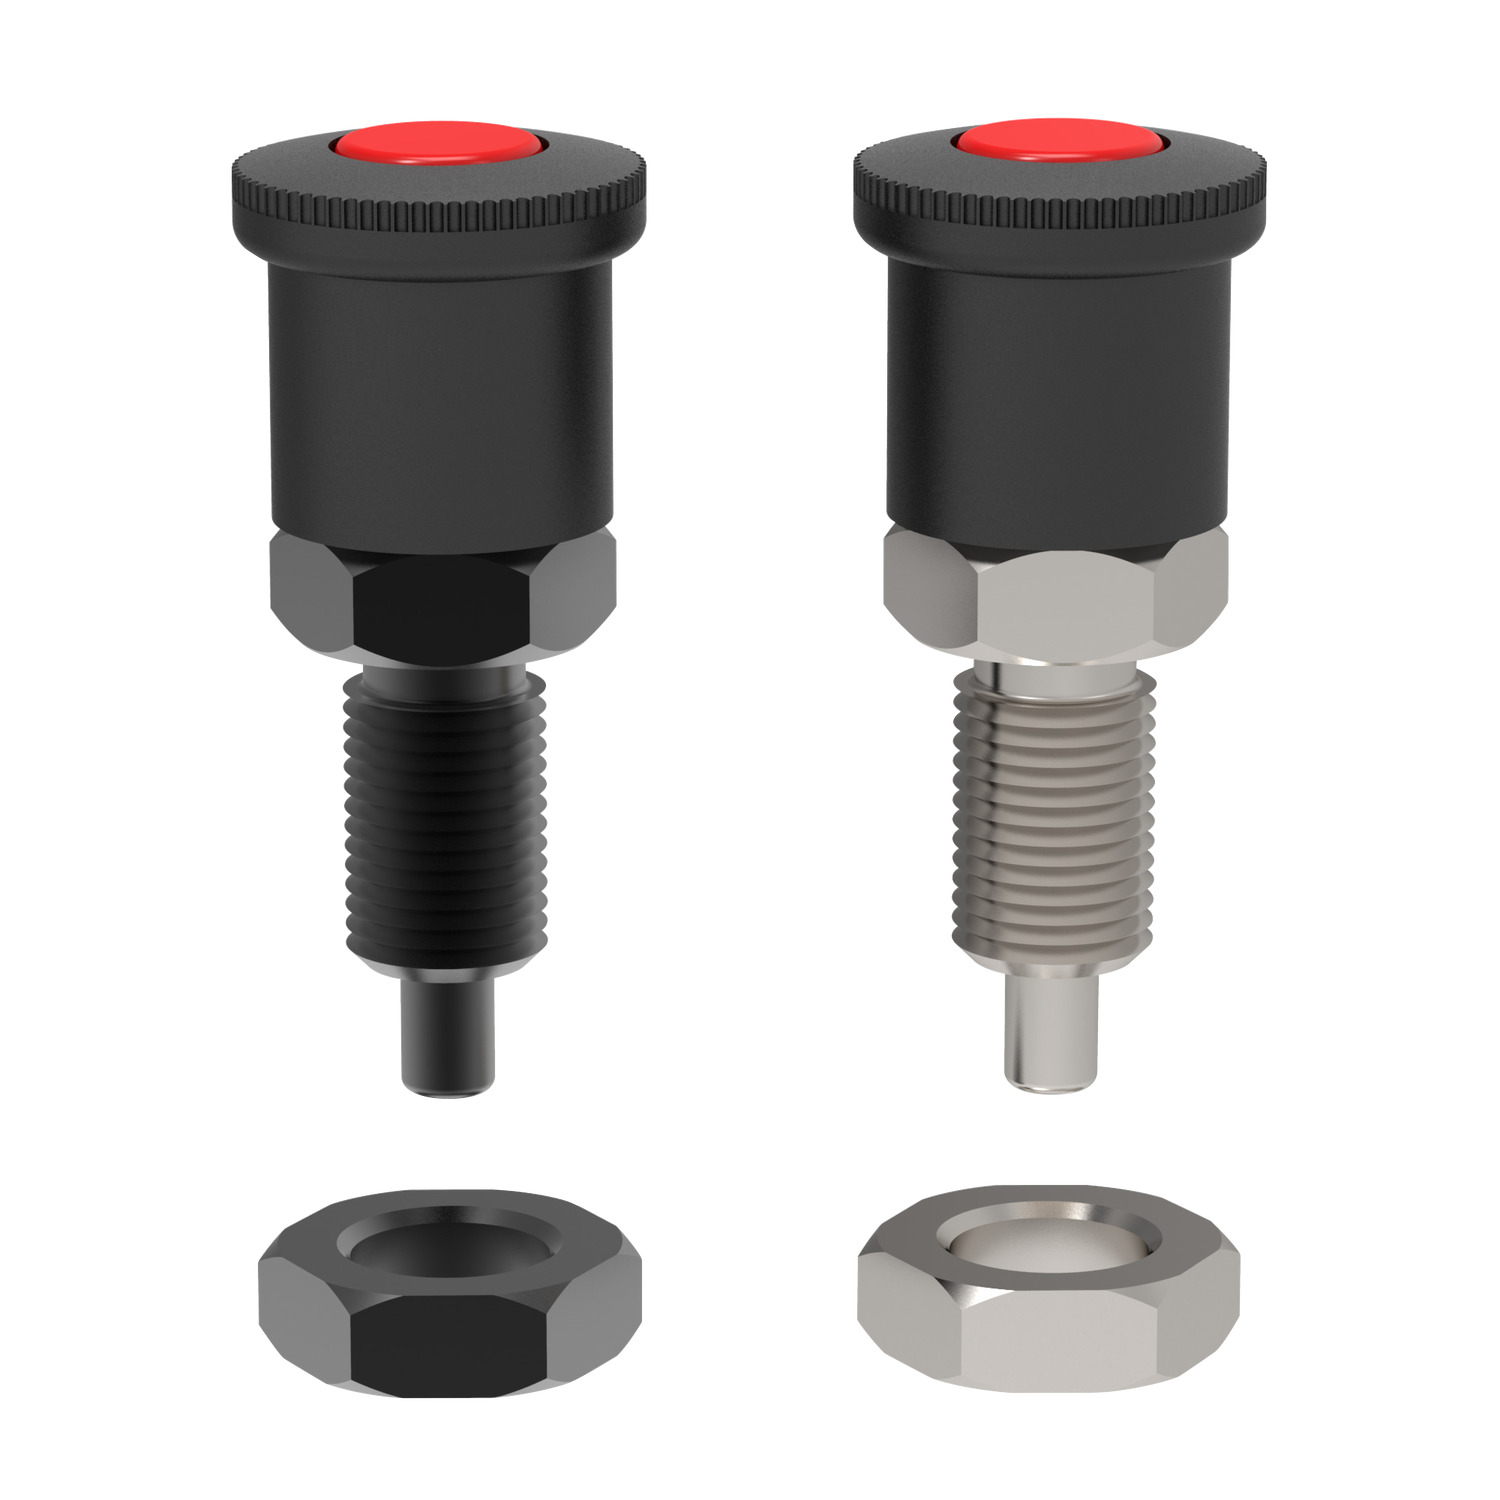 Index Plungers -Pull Grip Pull grip index plunger with rapid locking head. Pull knob up, red button flush= pin locked. Press red button, red button out=pin unlocked. Temperature range from -30°C to +80°C.